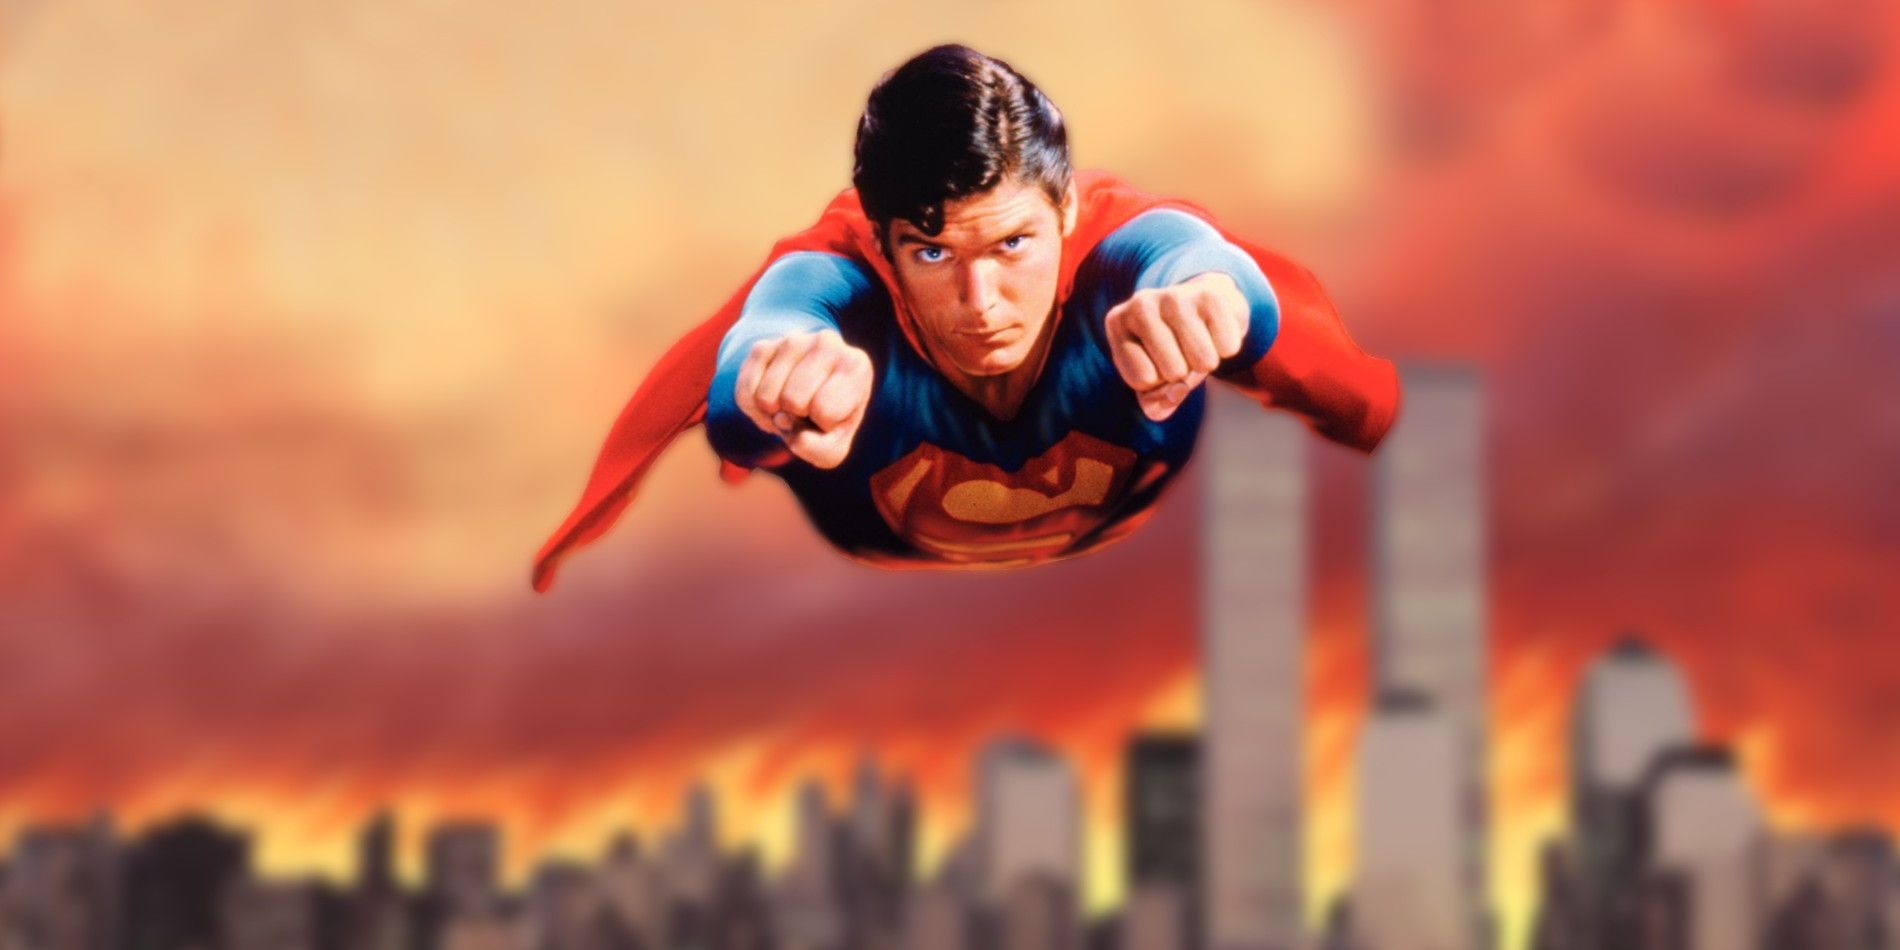 Superman flying away from NYC in Superman II